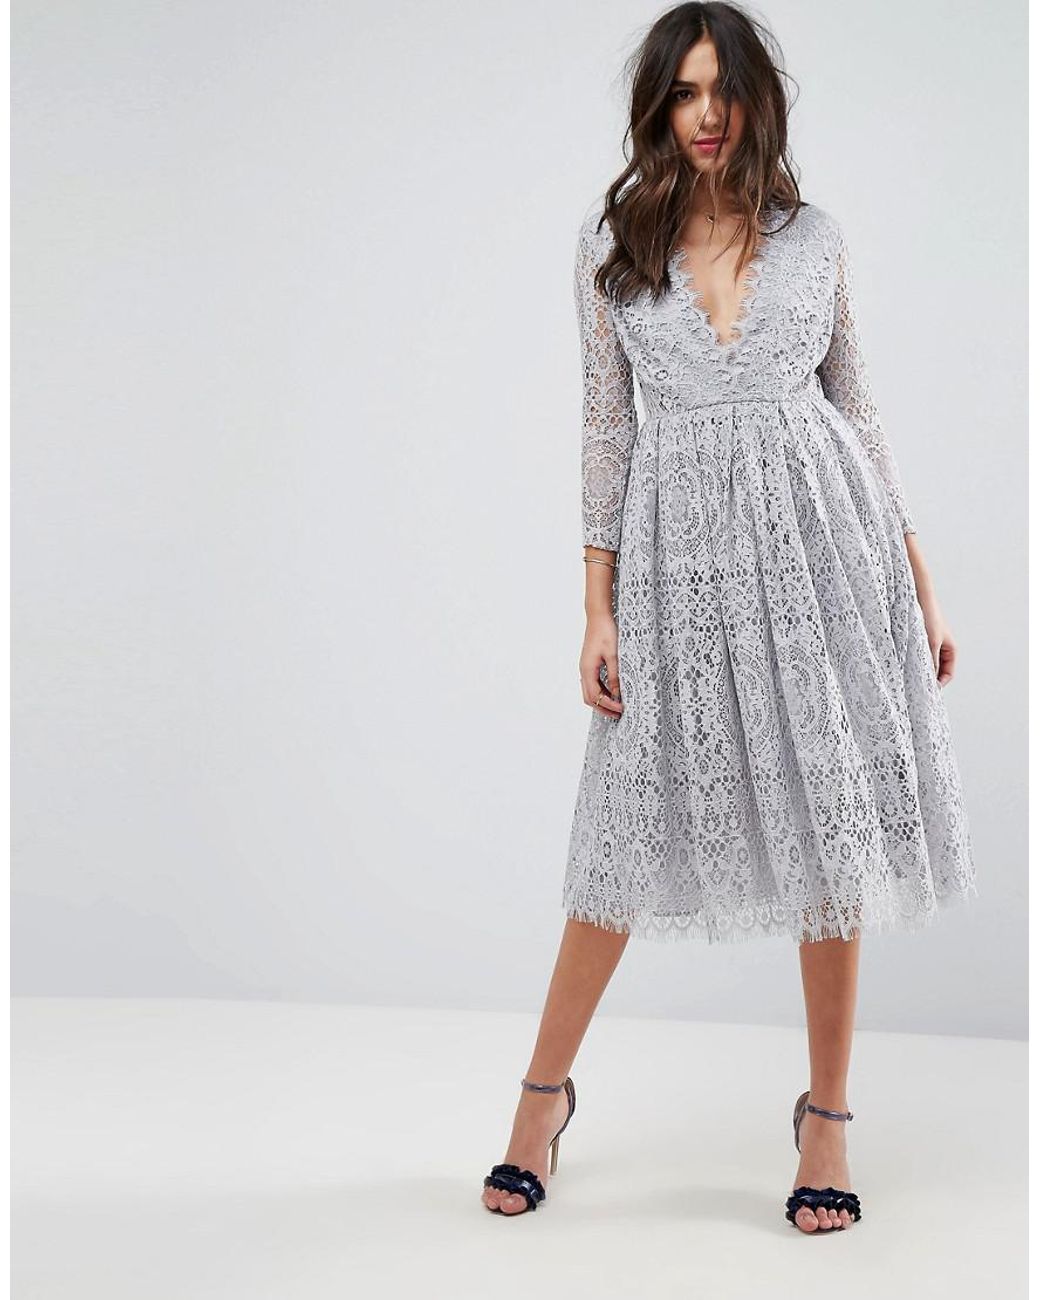 Lyst - ASOS Long Sleeve Lace Midi Prom Dress in Gray